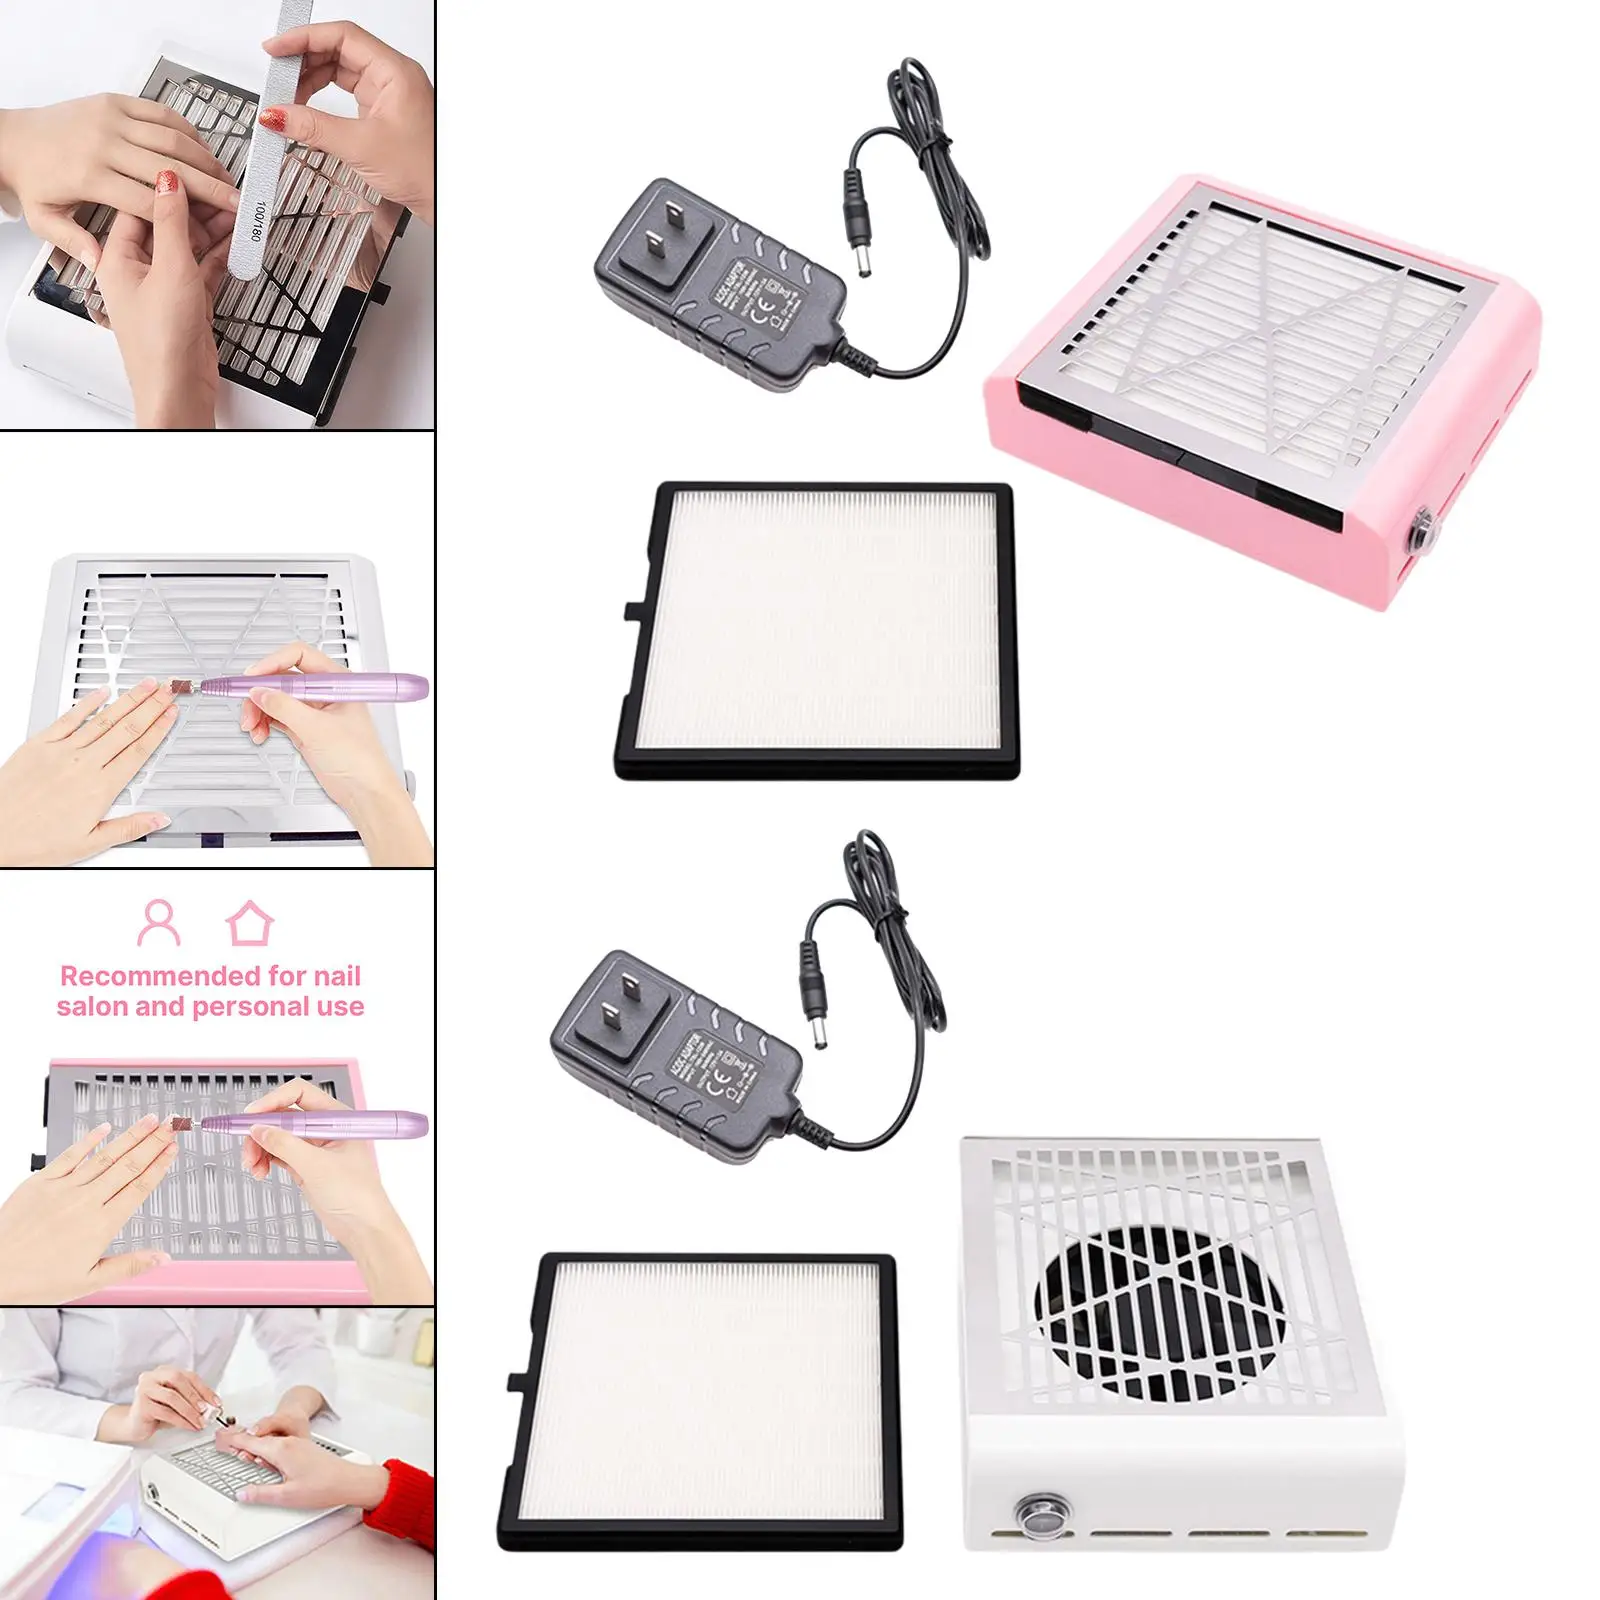 Nail Dust Collector Nail Dust Remover Nail Vacuum Suction Fan Dust Extractor for Manicure